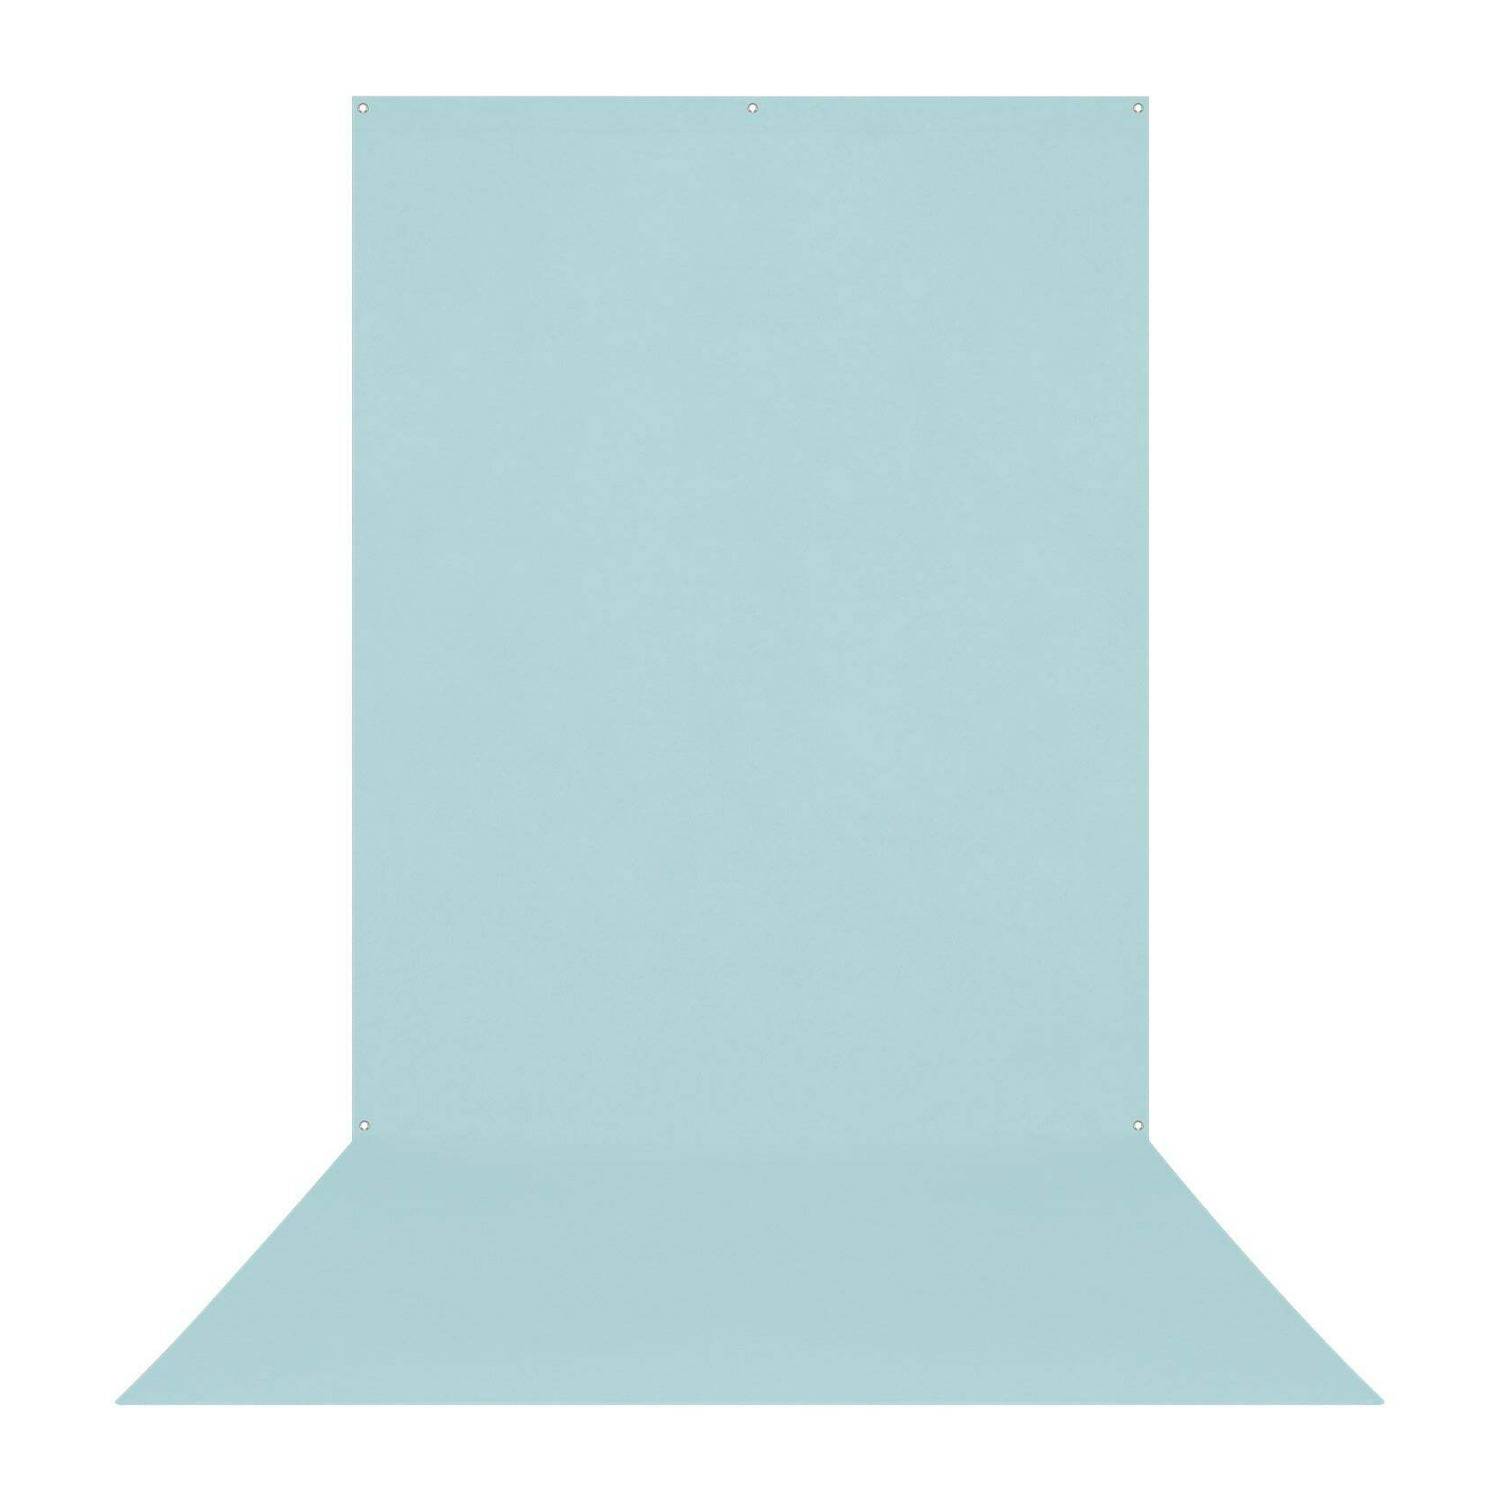 Westcott X-Drop Wrinkle-Resistant Backdrop For Video Conferencing (Pastel Blue, 5 x 12 Feet)